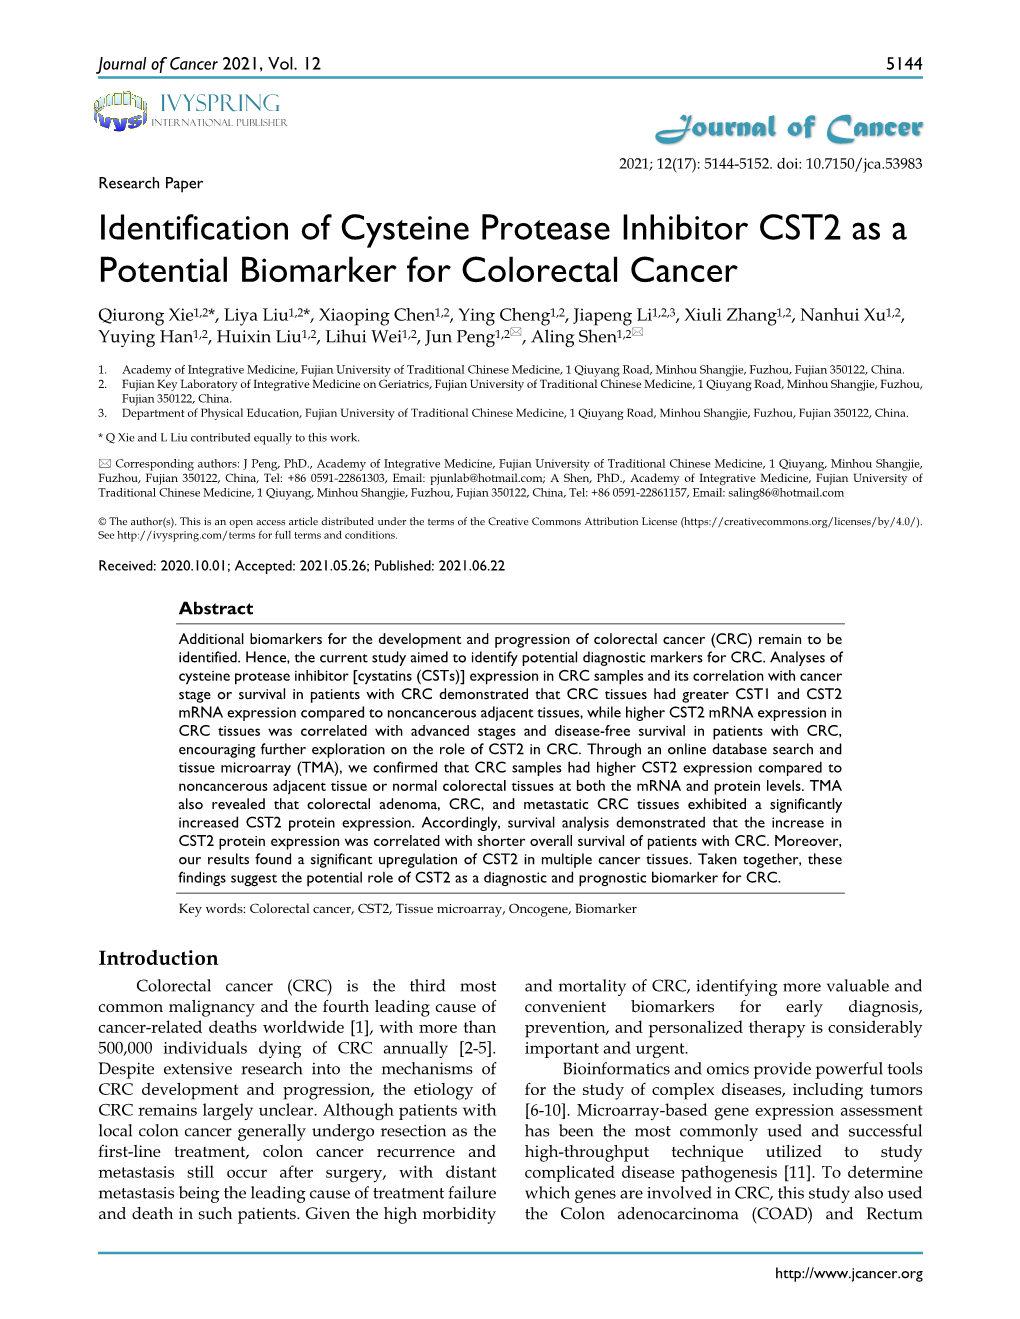 Identification of Cysteine Protease Inhibitor CST2 As a Potential